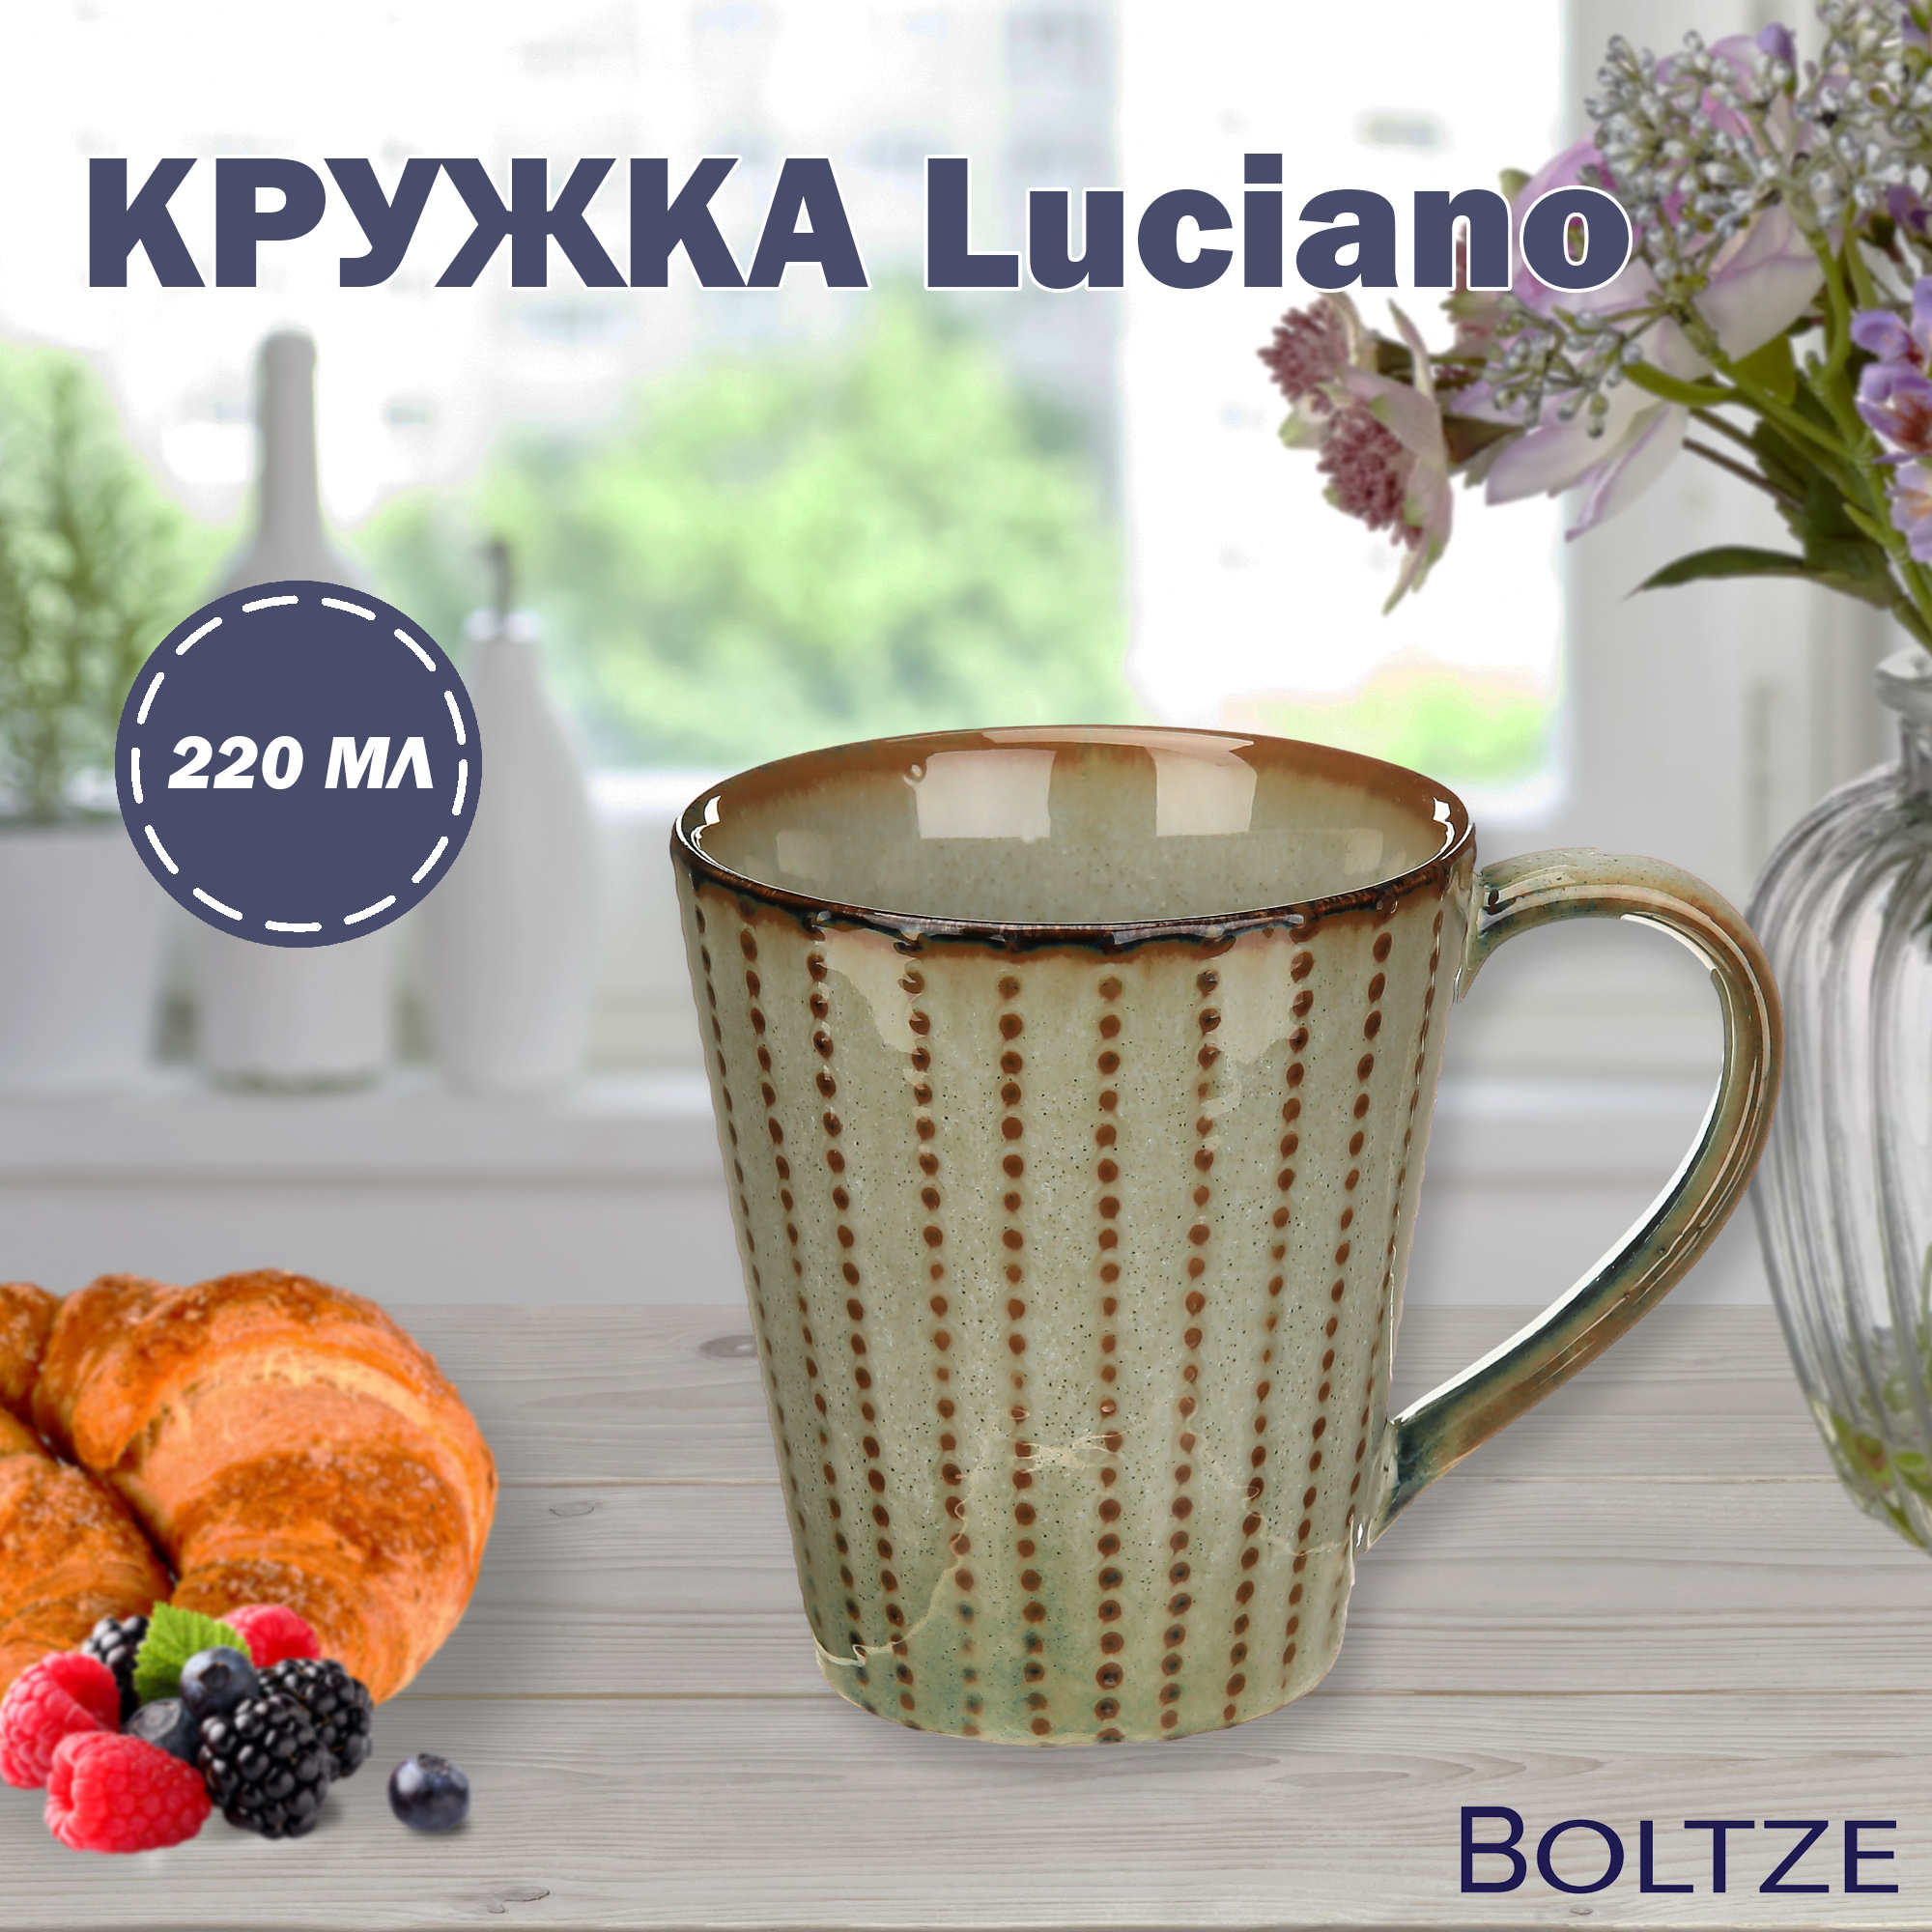 фото Кружка boltze luciano 220 мл